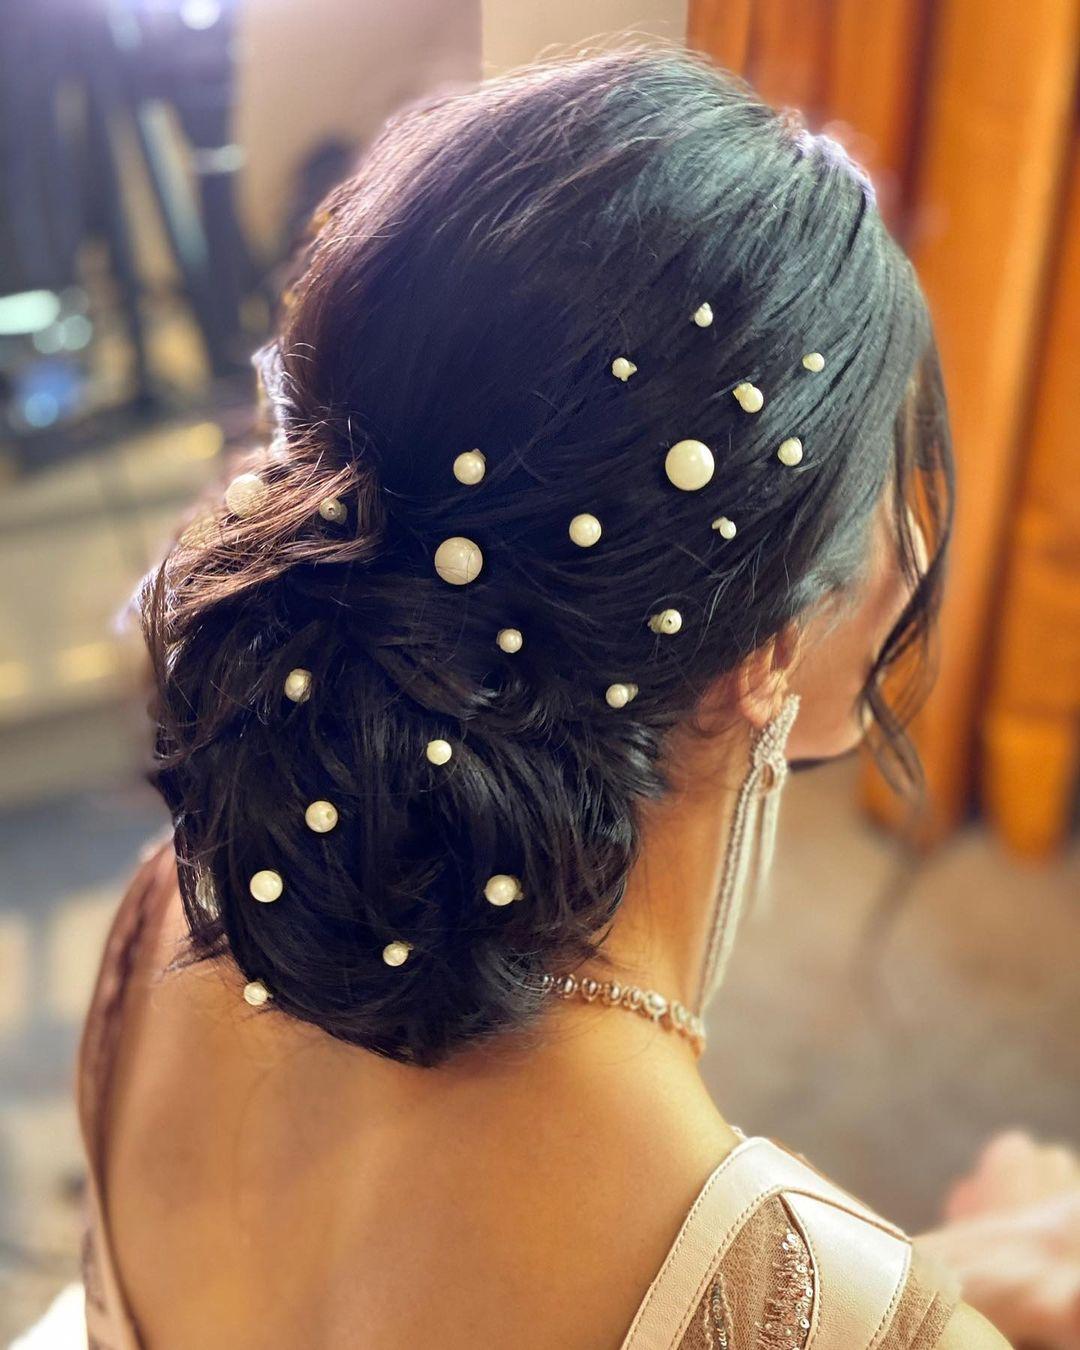 Simple Hairstyle Images: 9 New Hair Style Pics for Wedding Look